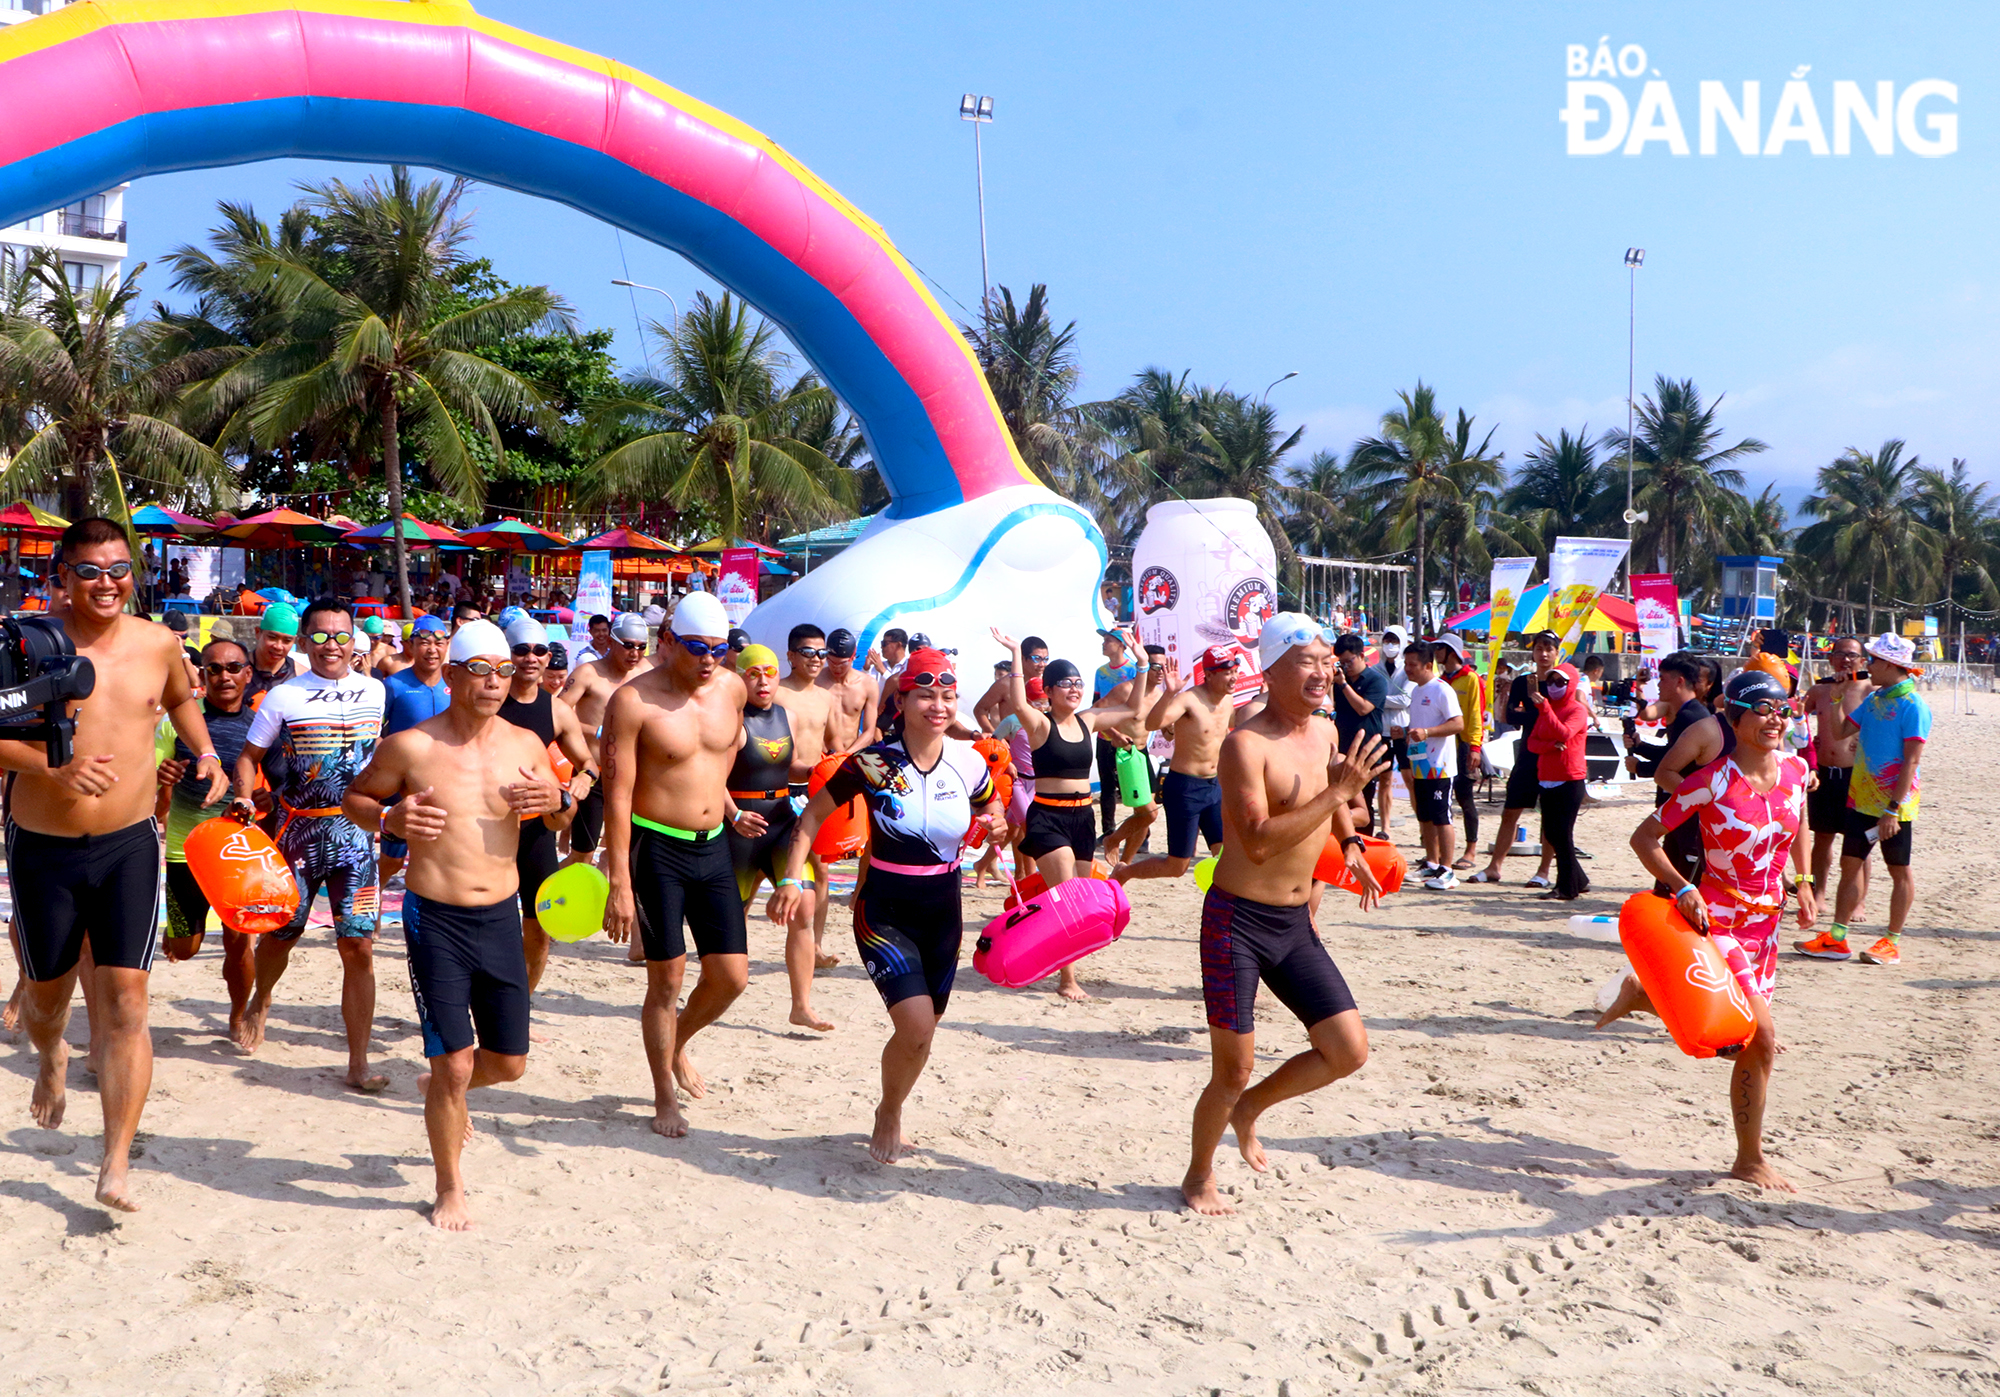  Over 500 athletes compete in competitions during this year's event.